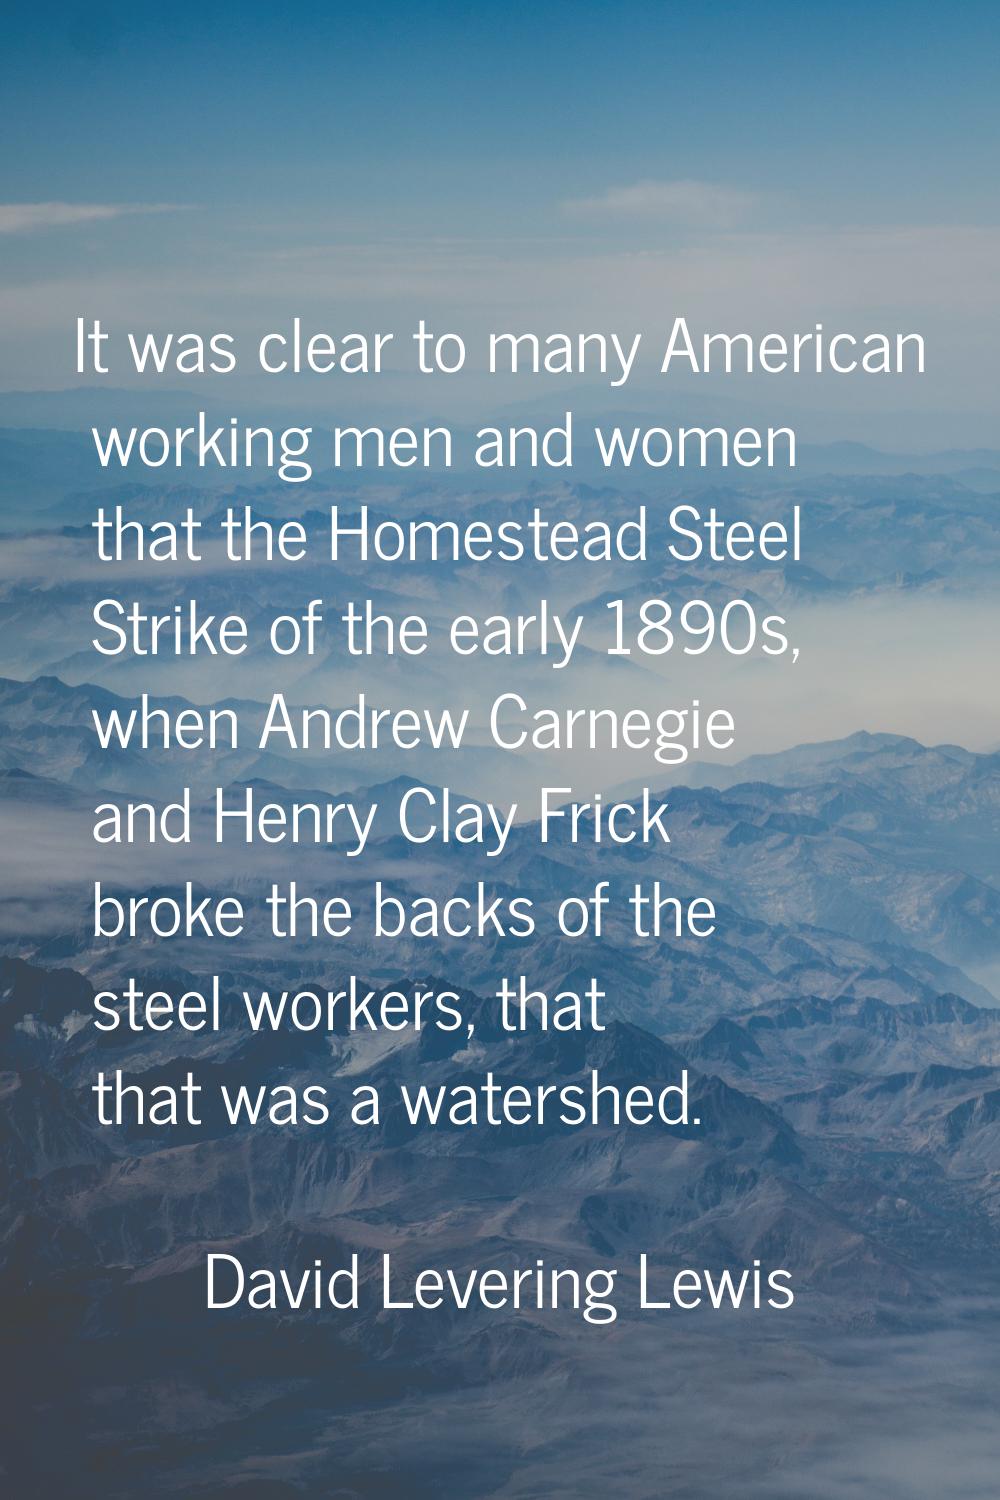 It was clear to many American working men and women that the Homestead Steel Strike of the early 18